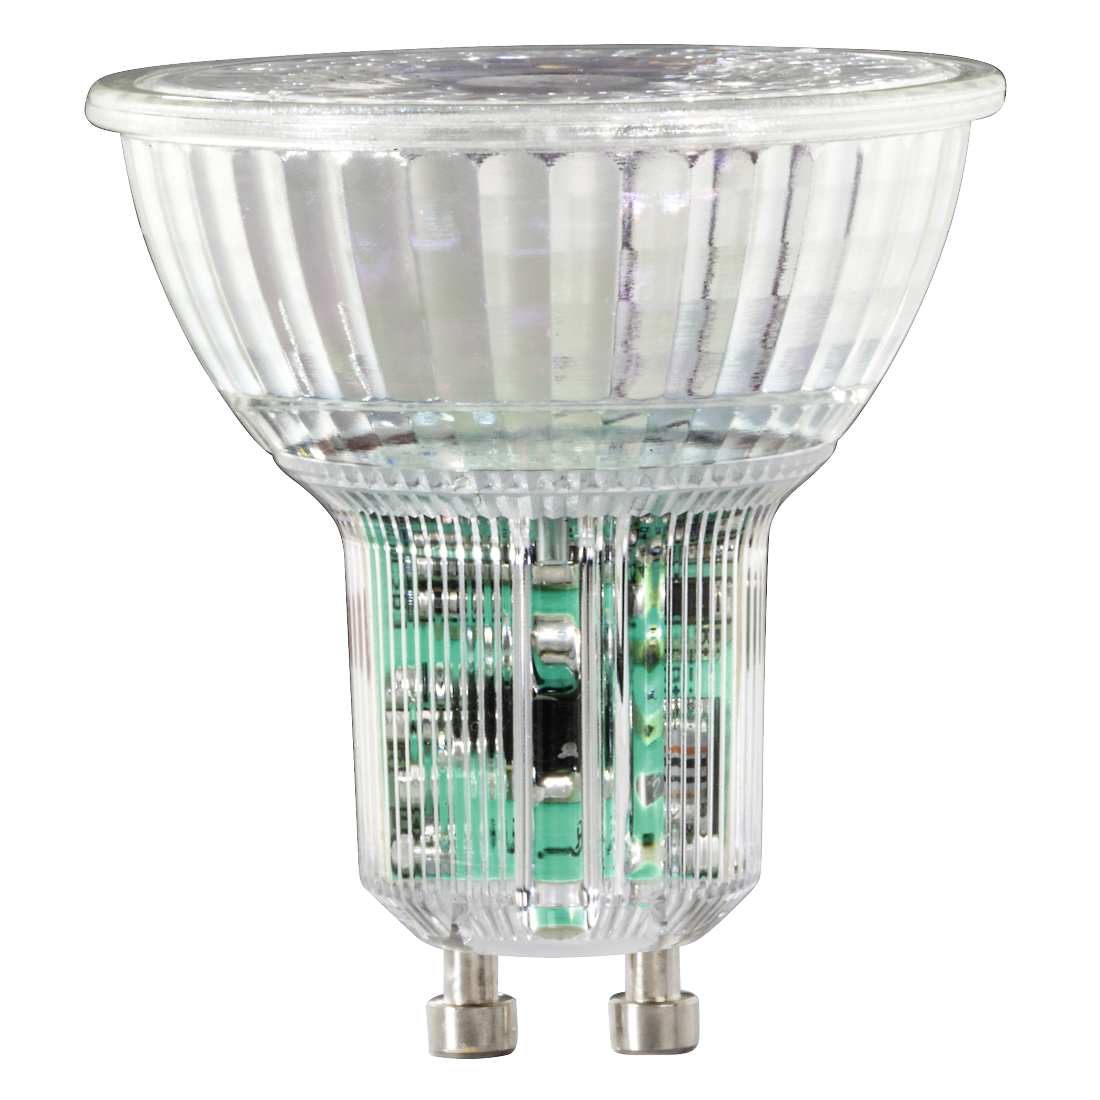 abx High-Res Image - Xavax, LED Lamp, GU10, 350 lm Replaces 50W, Refl. PAR16, warm white, Glass, Dimmable